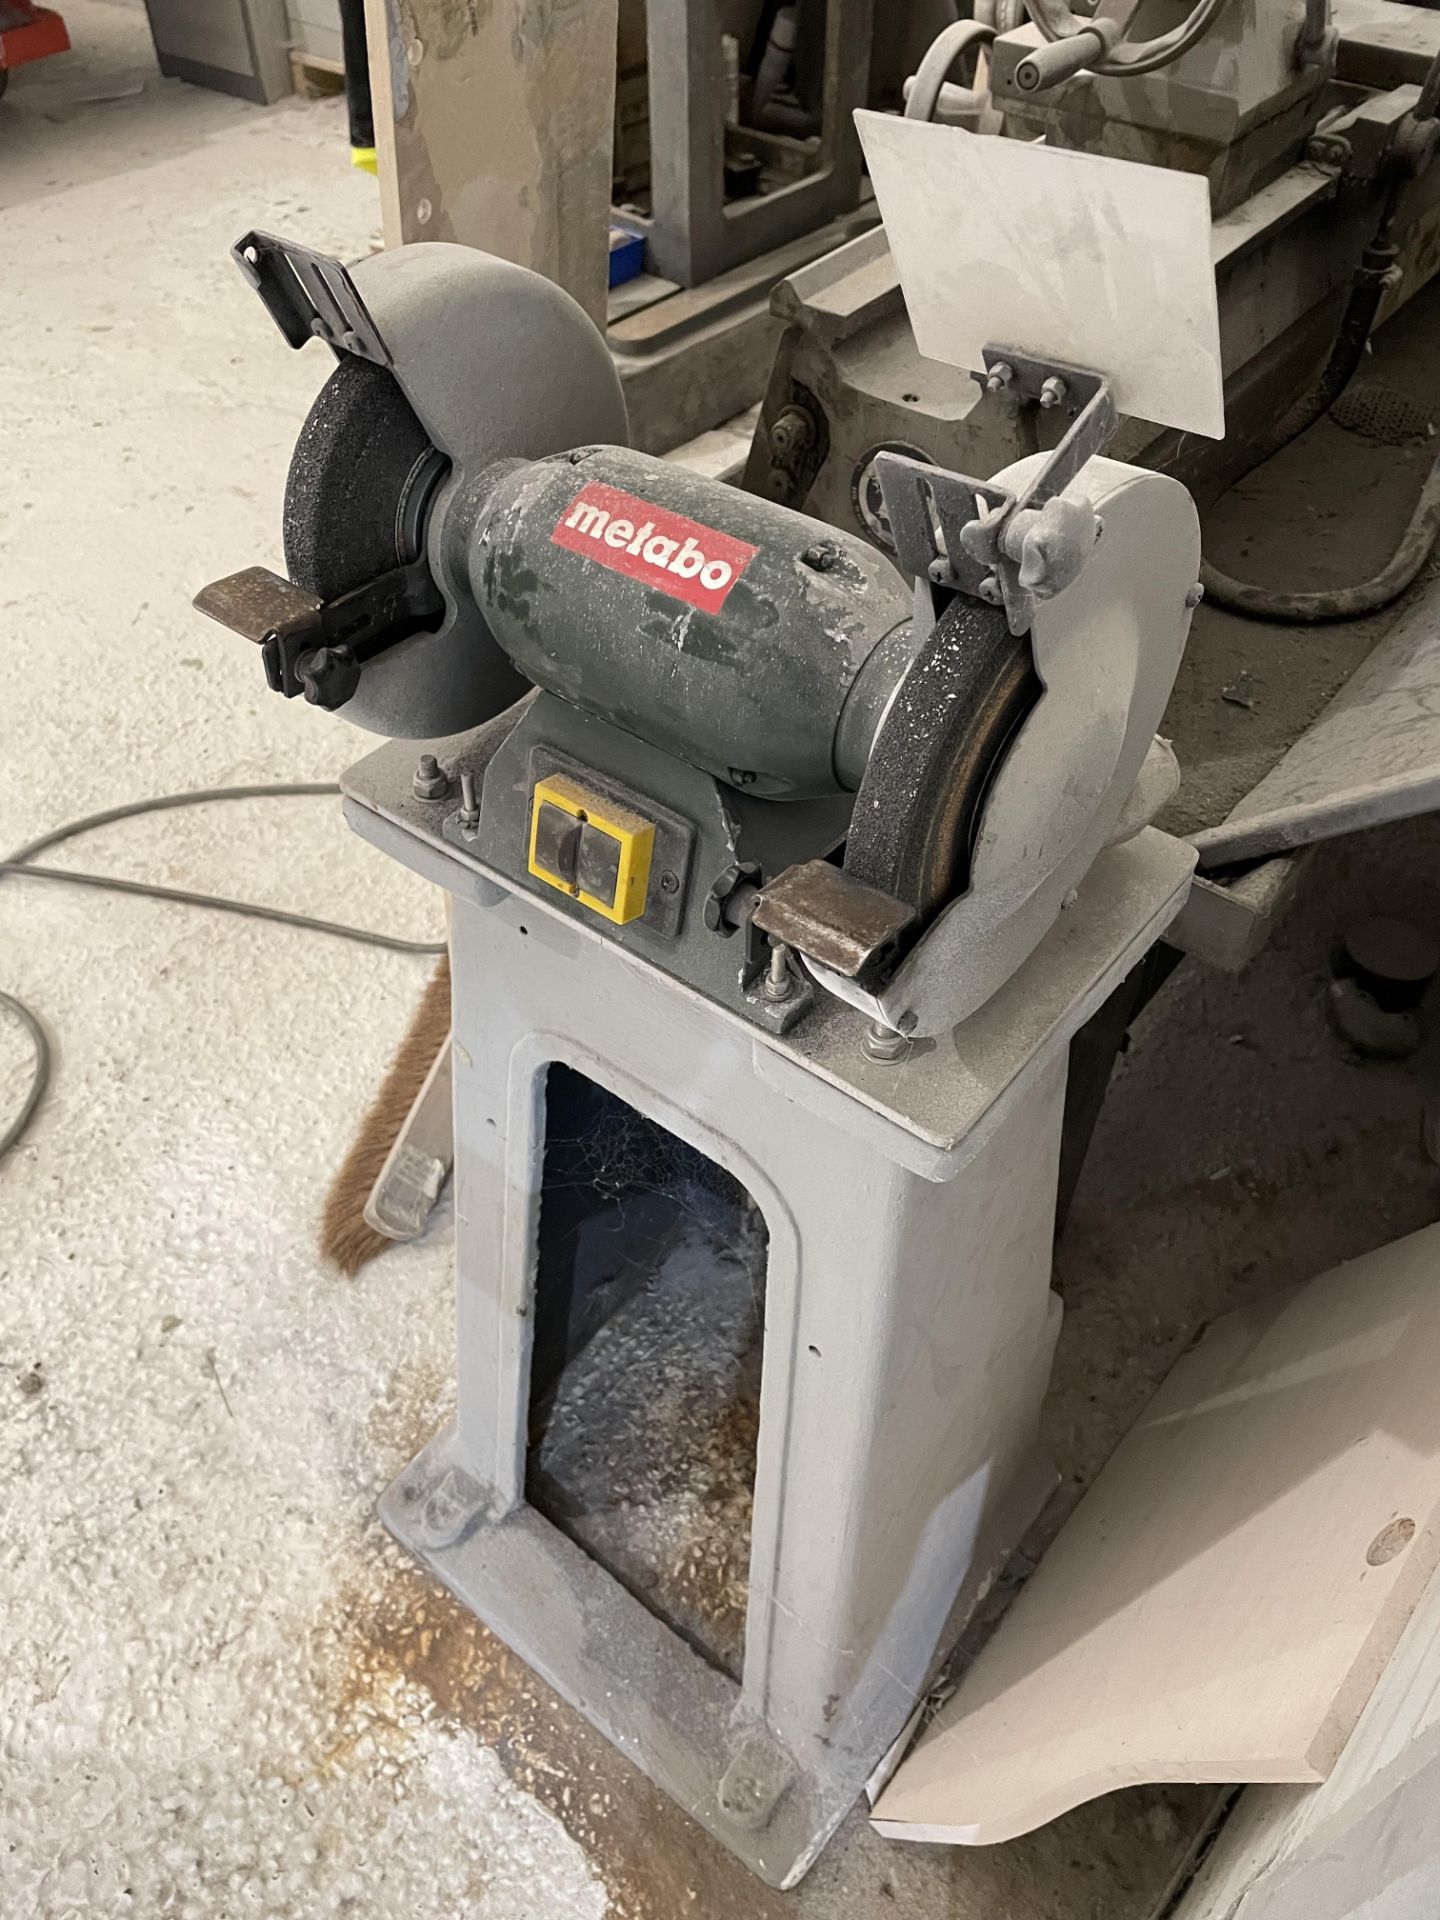 Metabo DS D 9201 Double Grinder on Metal Base S/No. 09201001, 3-Phase - Image 2 of 3